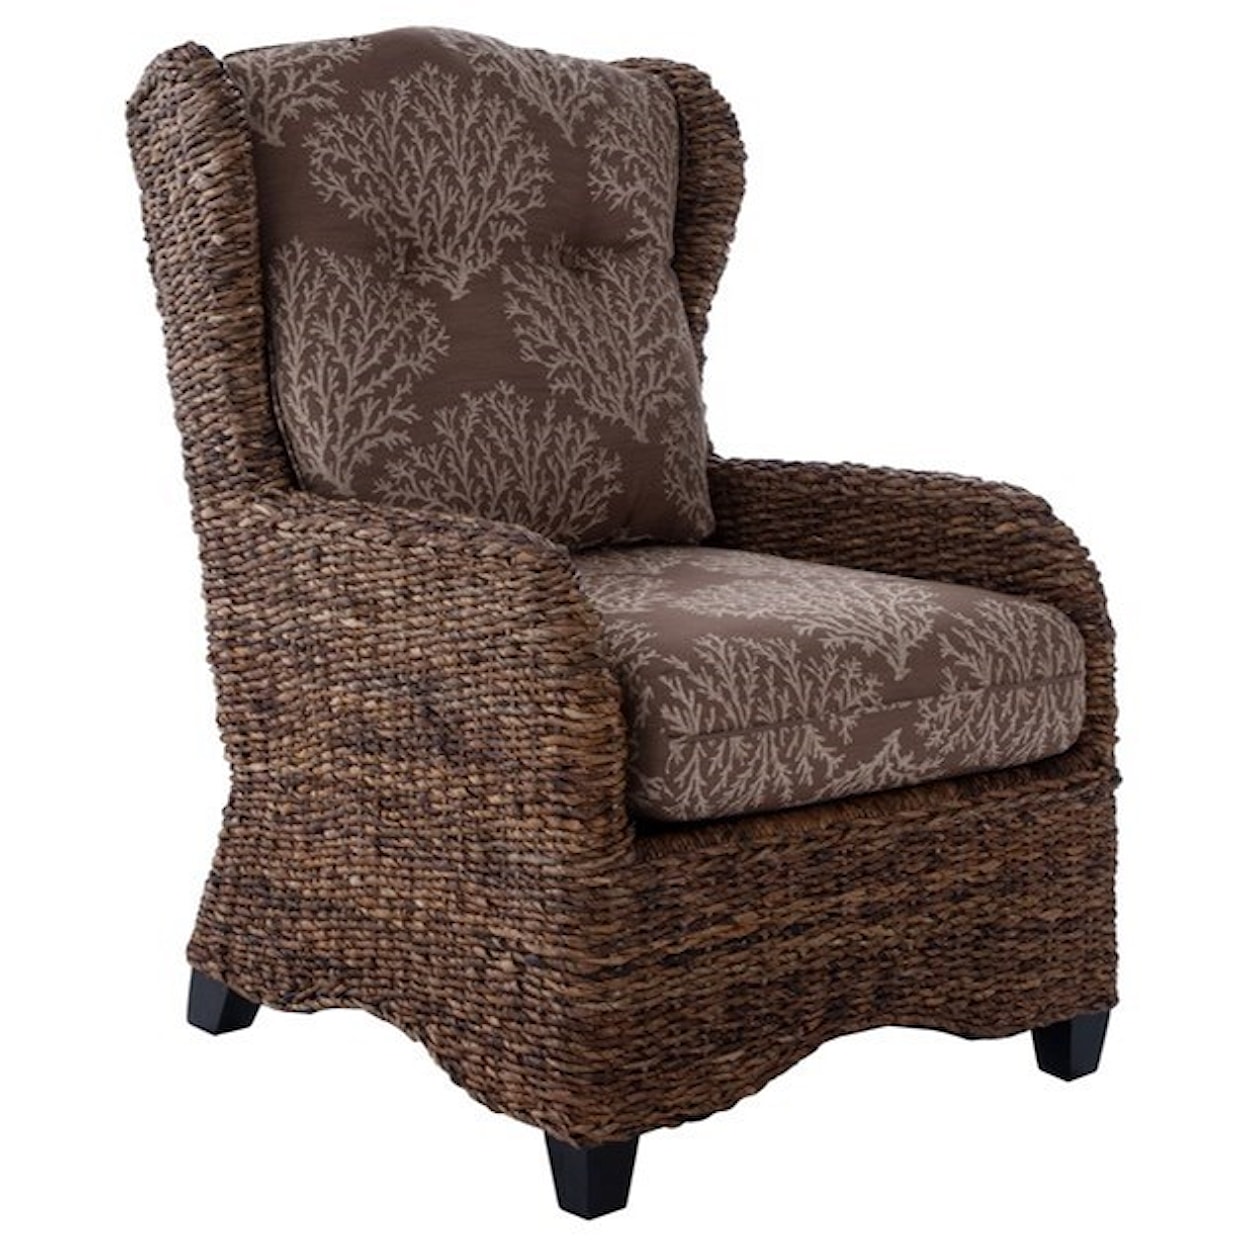 Capris Furniture 700 Woven Accent Chair